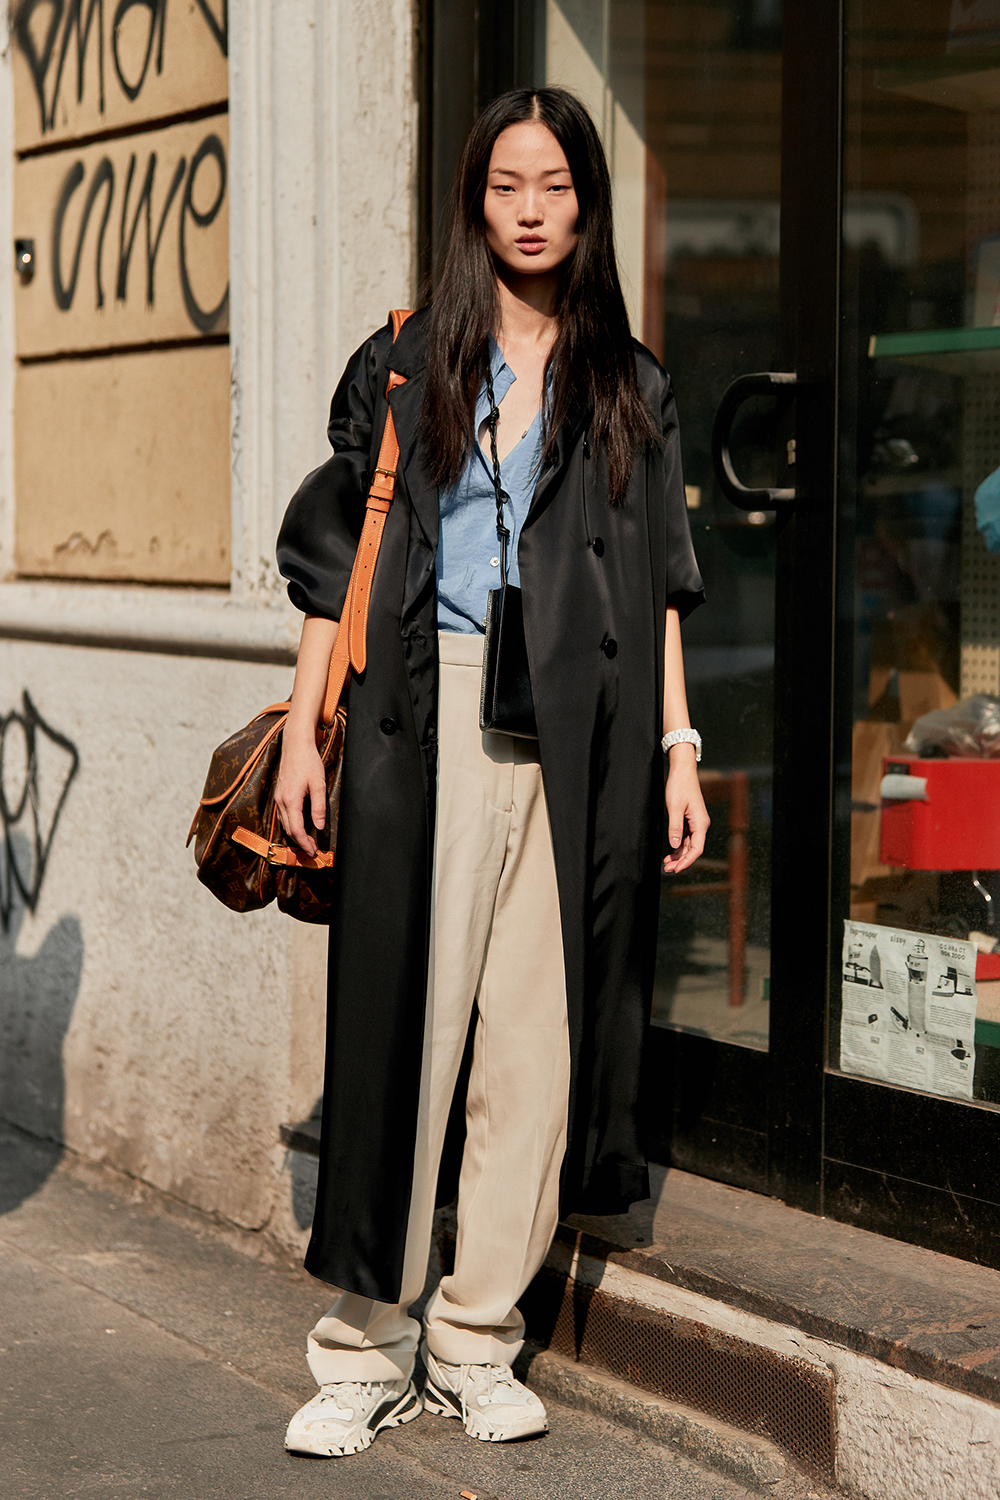 The Latest Street Style From Milan Fashion Week | Who What Wear UK